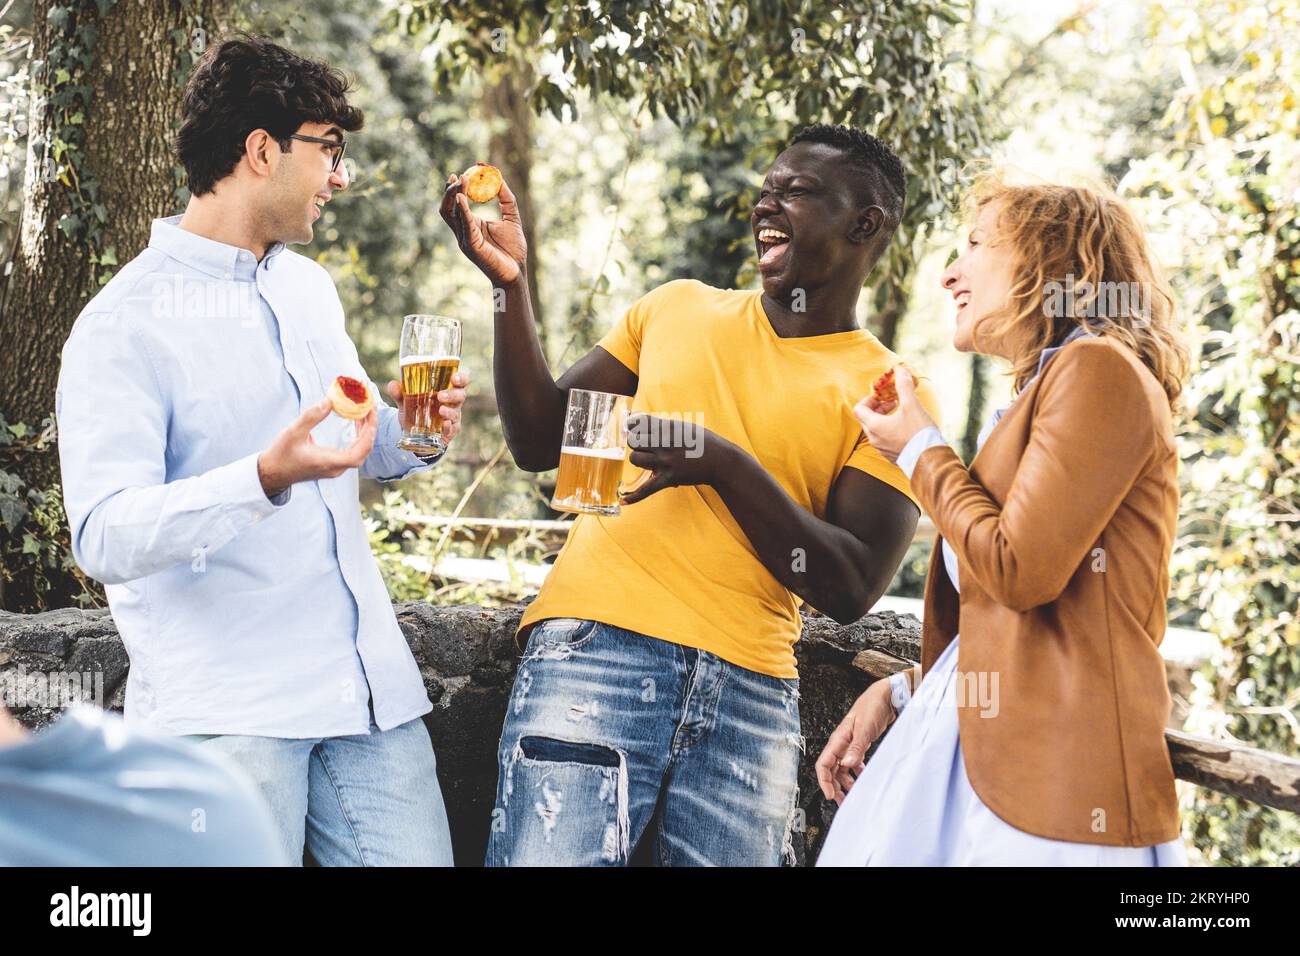 multiracial group of friends laughing and having fun at party, mixed age range group celebrating something eating snack and drinking beers Stock Photo